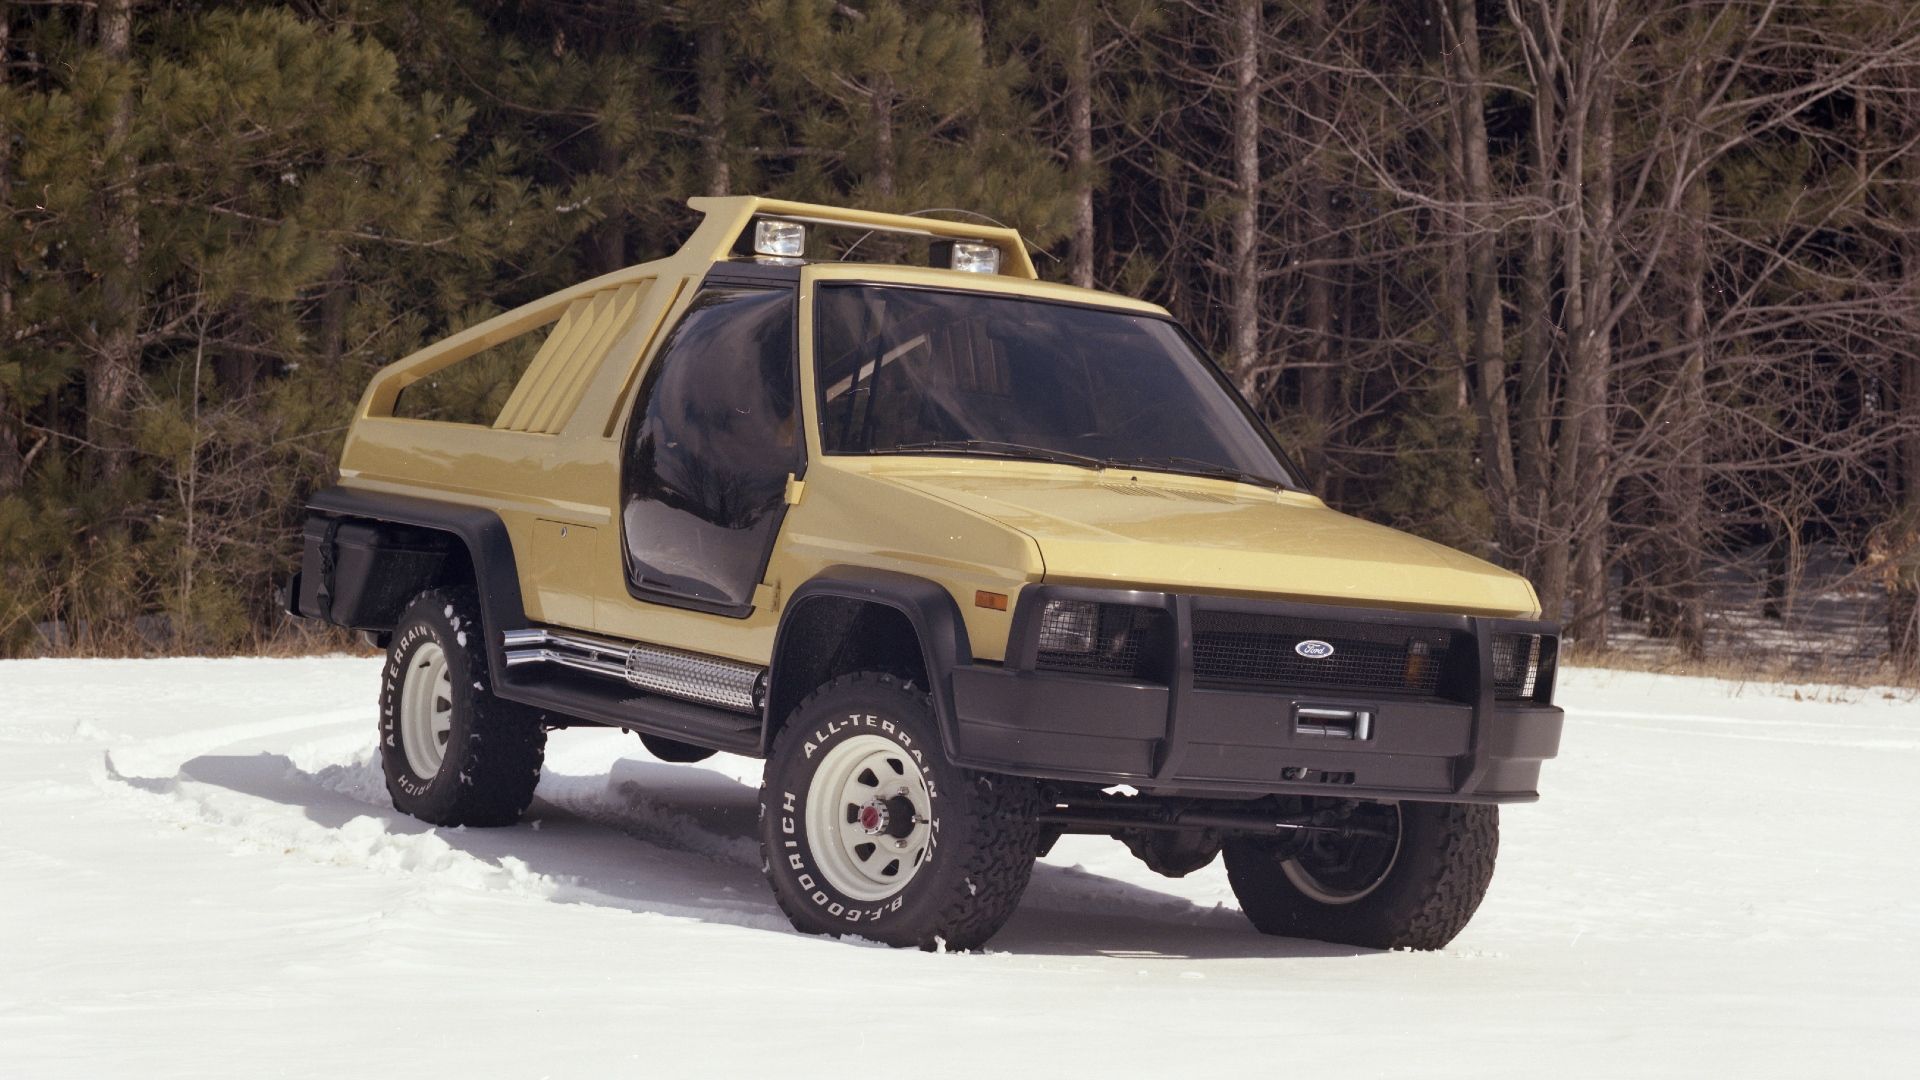 View Photos of Ford Bronco Adventure-Inspired Concepts